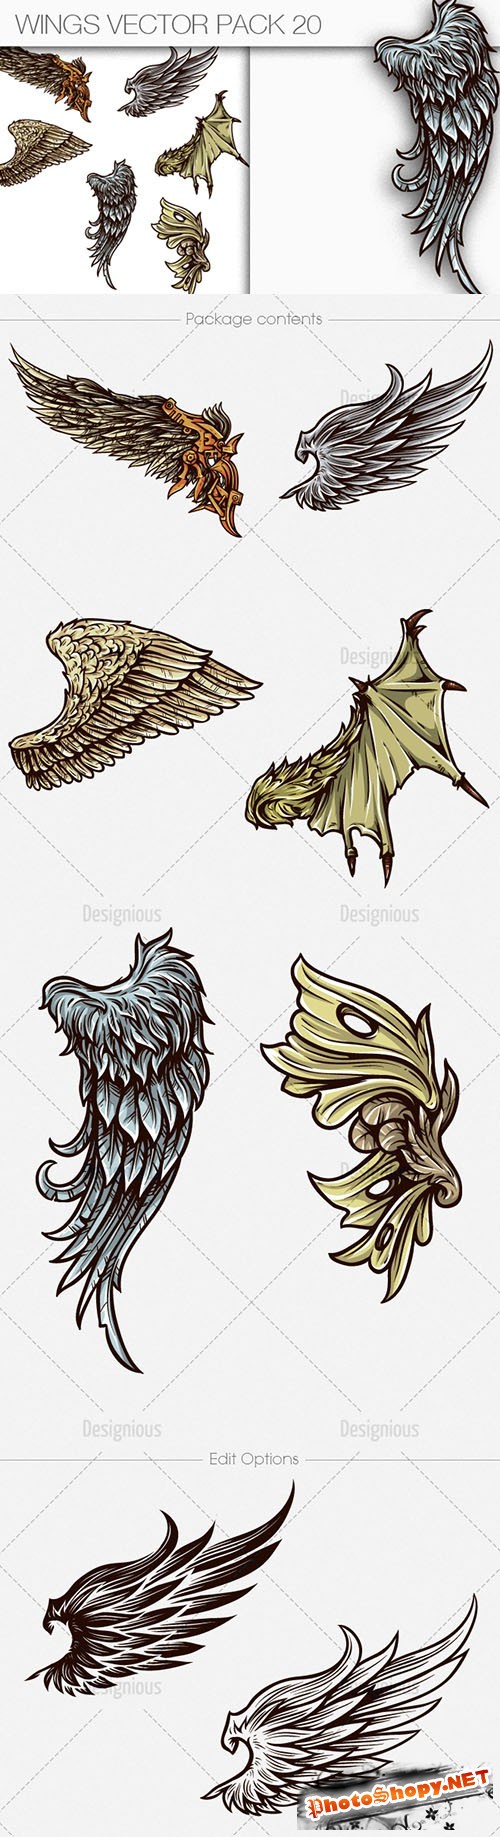 Wings Vector Illustrations Pack 20